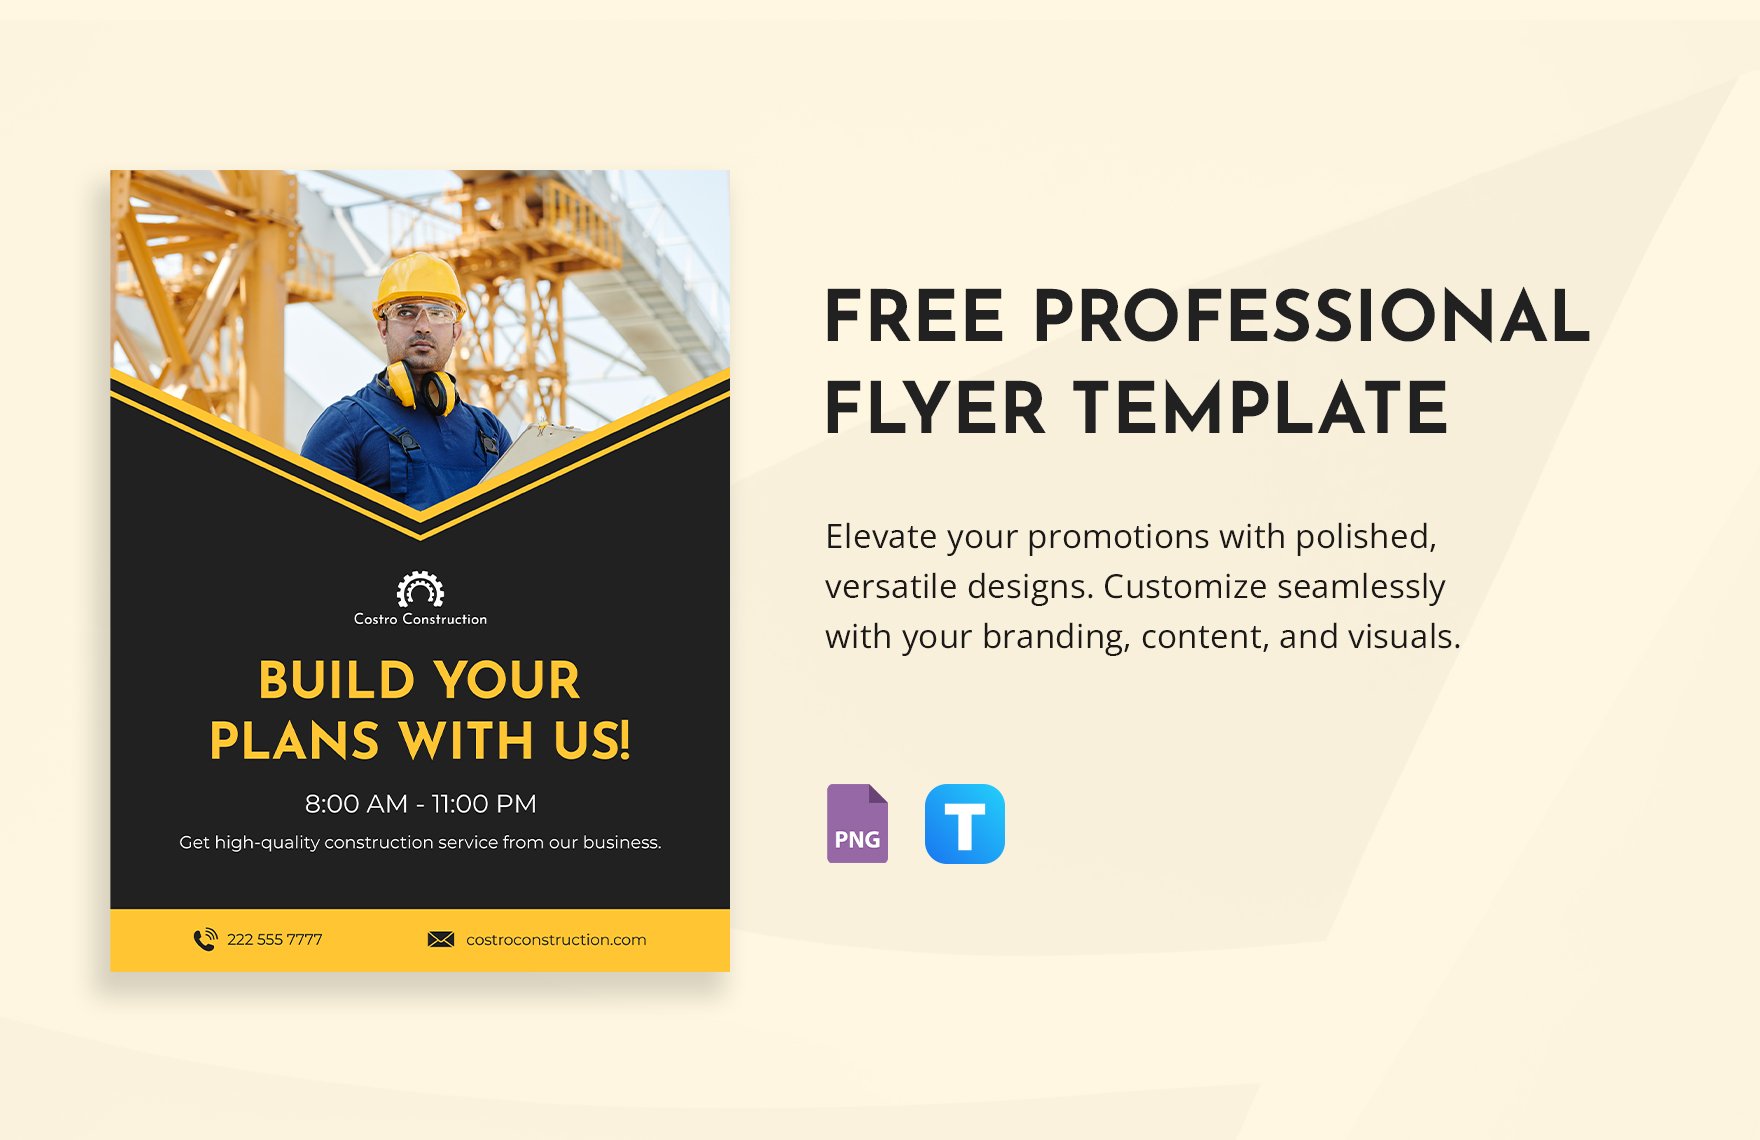 Professional Flyer Template in PNG